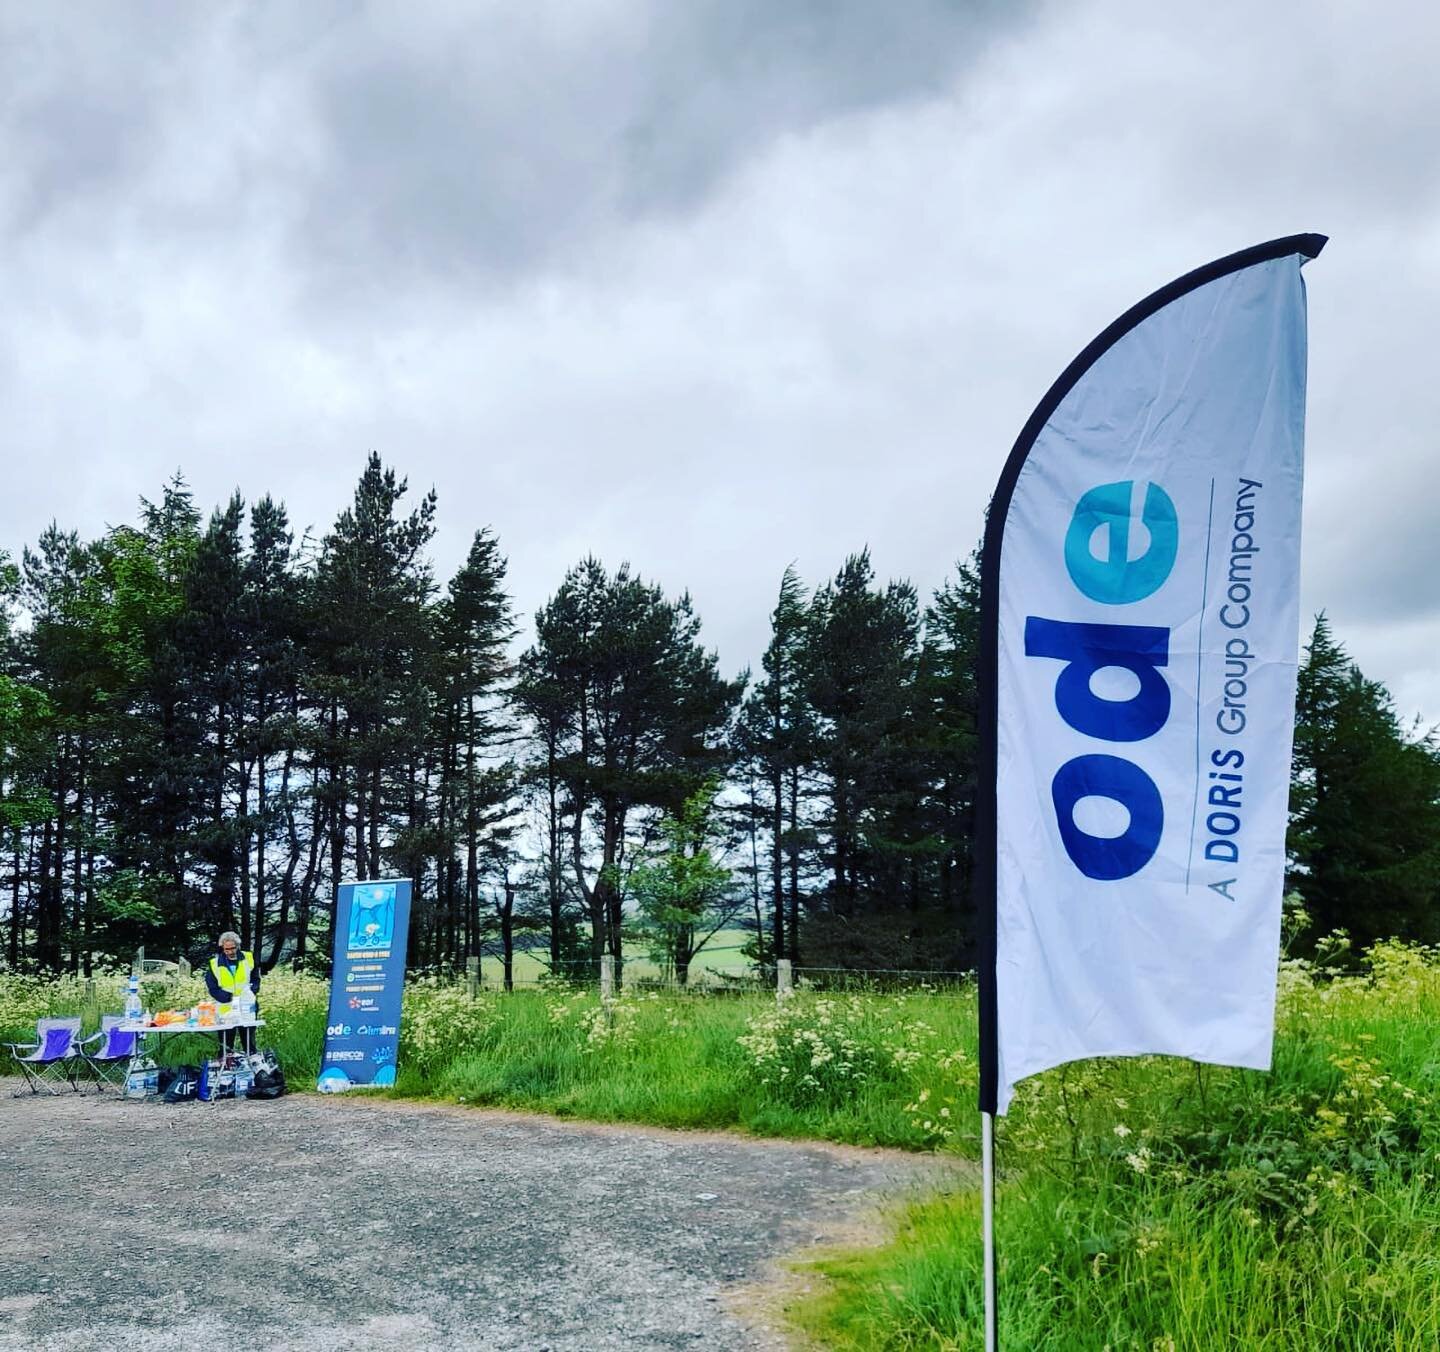 Thank You to all of our amazing sponsors from yesterday&rsquo;s Earth Wind &amp; Tyre event: EDF Renewables, ODE, TerraUrsa, Enercon and Derwent Hydro - without you it wouldn&rsquo;t be possible! 🙏

#earthwindtyre #renewableworld